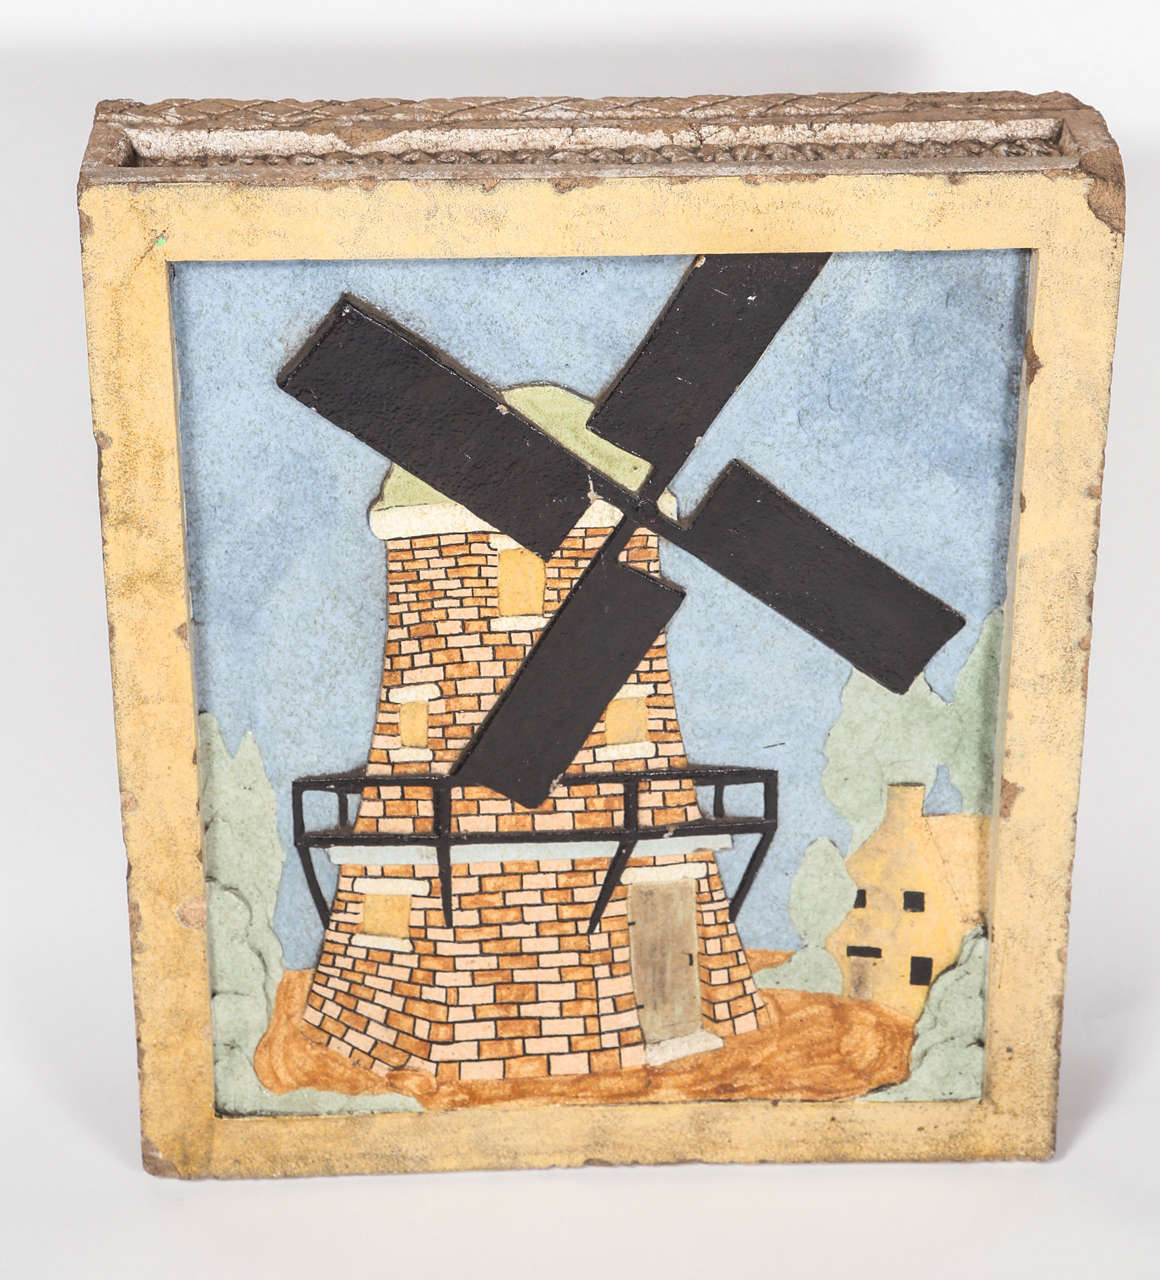 Large ceramic block with a windmill design from the Netherlands. Originally built into a wall. 
Please note, this item is located in our Los Angeles location.
